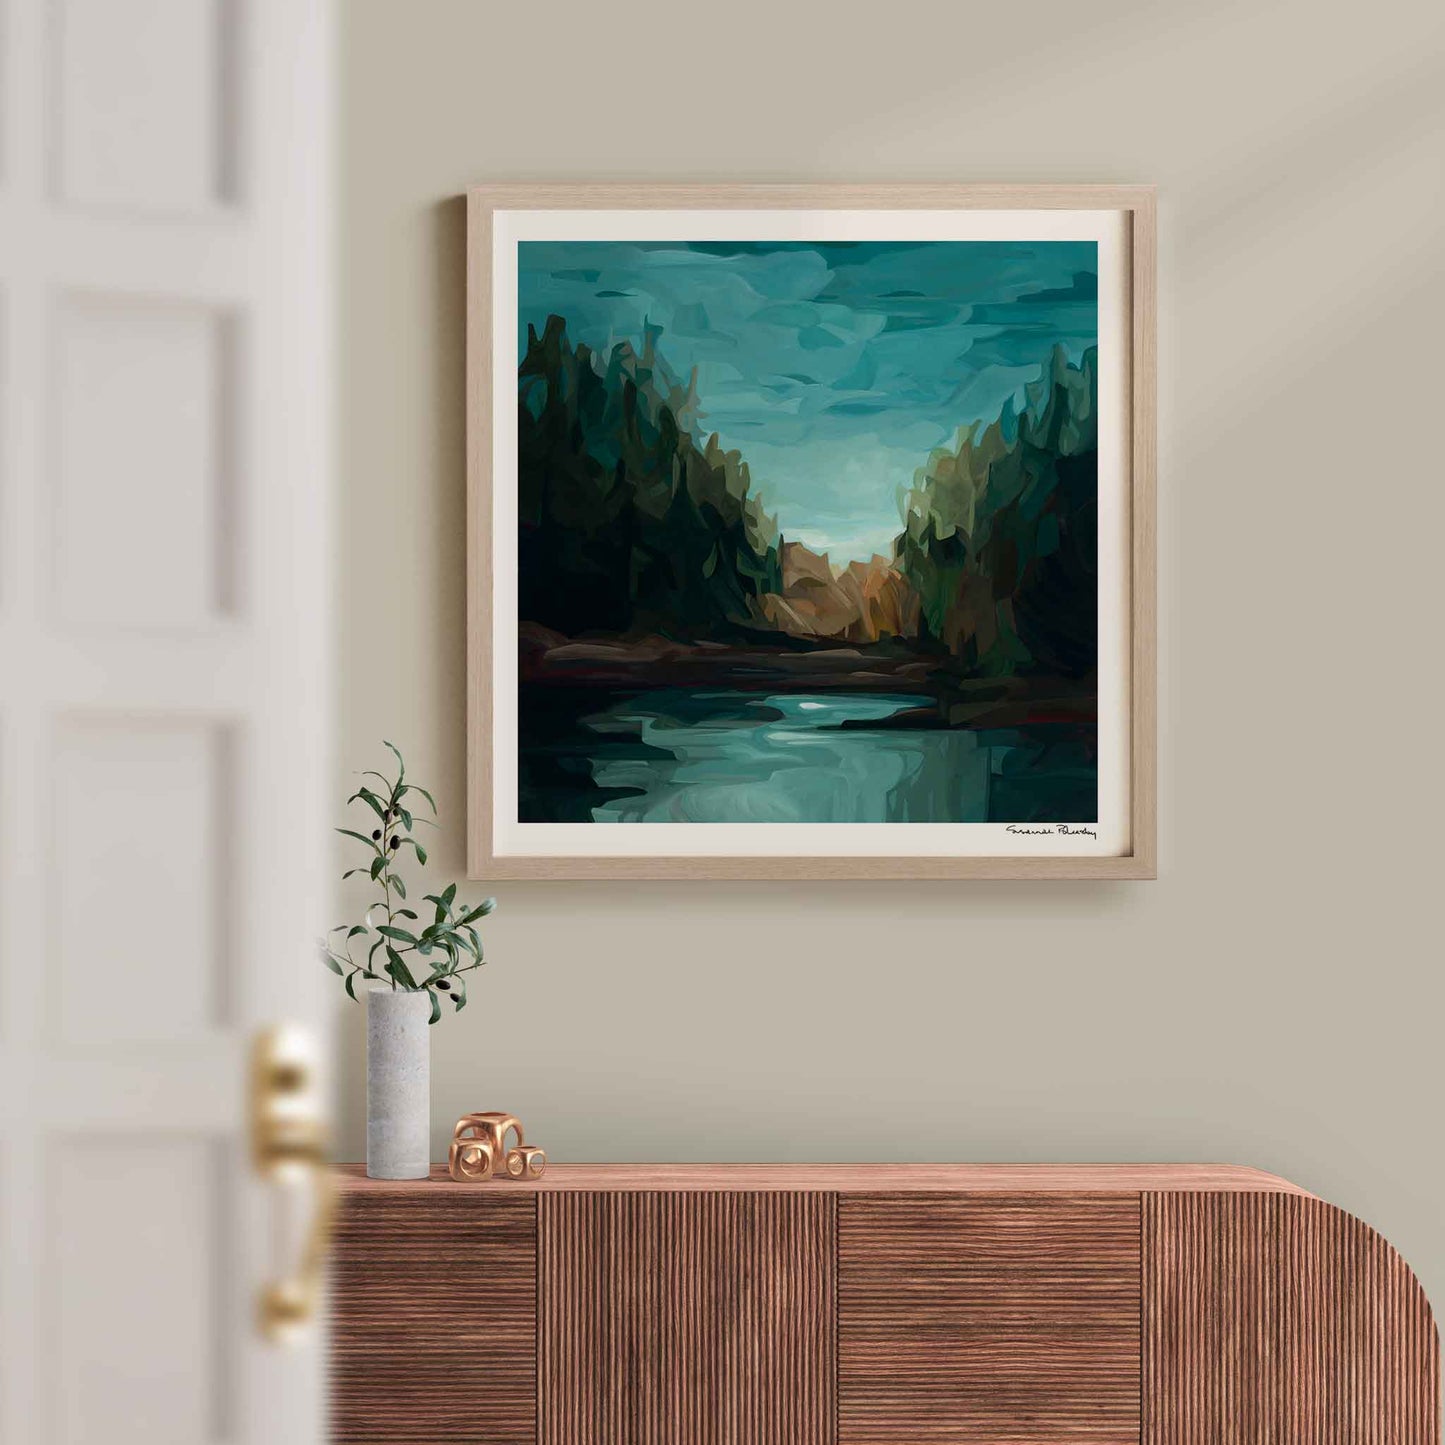 Large abstract forest landscape art print called 'Dewpoint' from a collection of acrylic landscape paintings by Canadian artist Susannah Bleasby